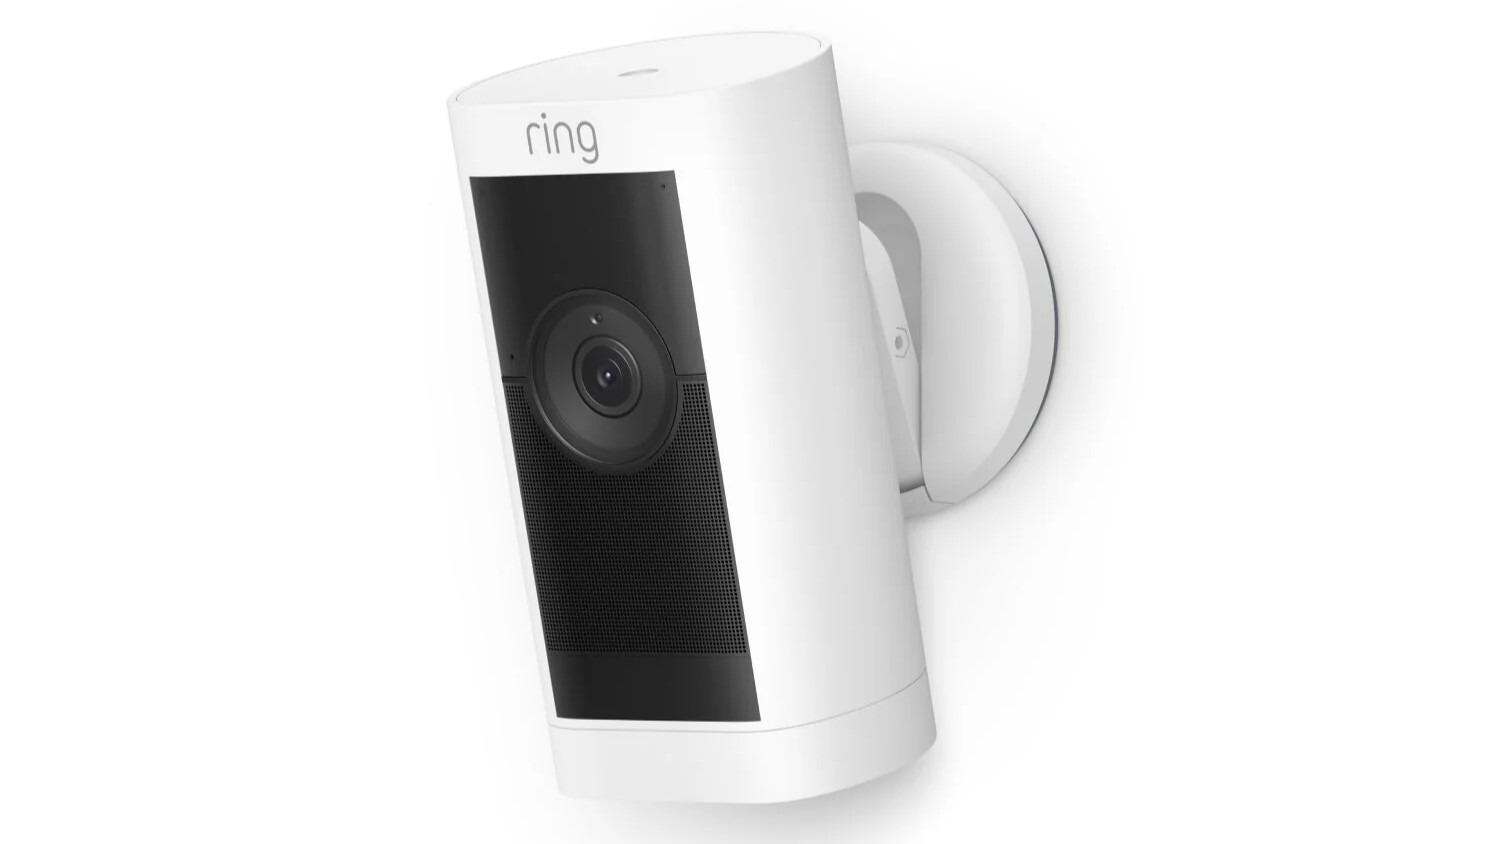 ring camera won't connect to wifi